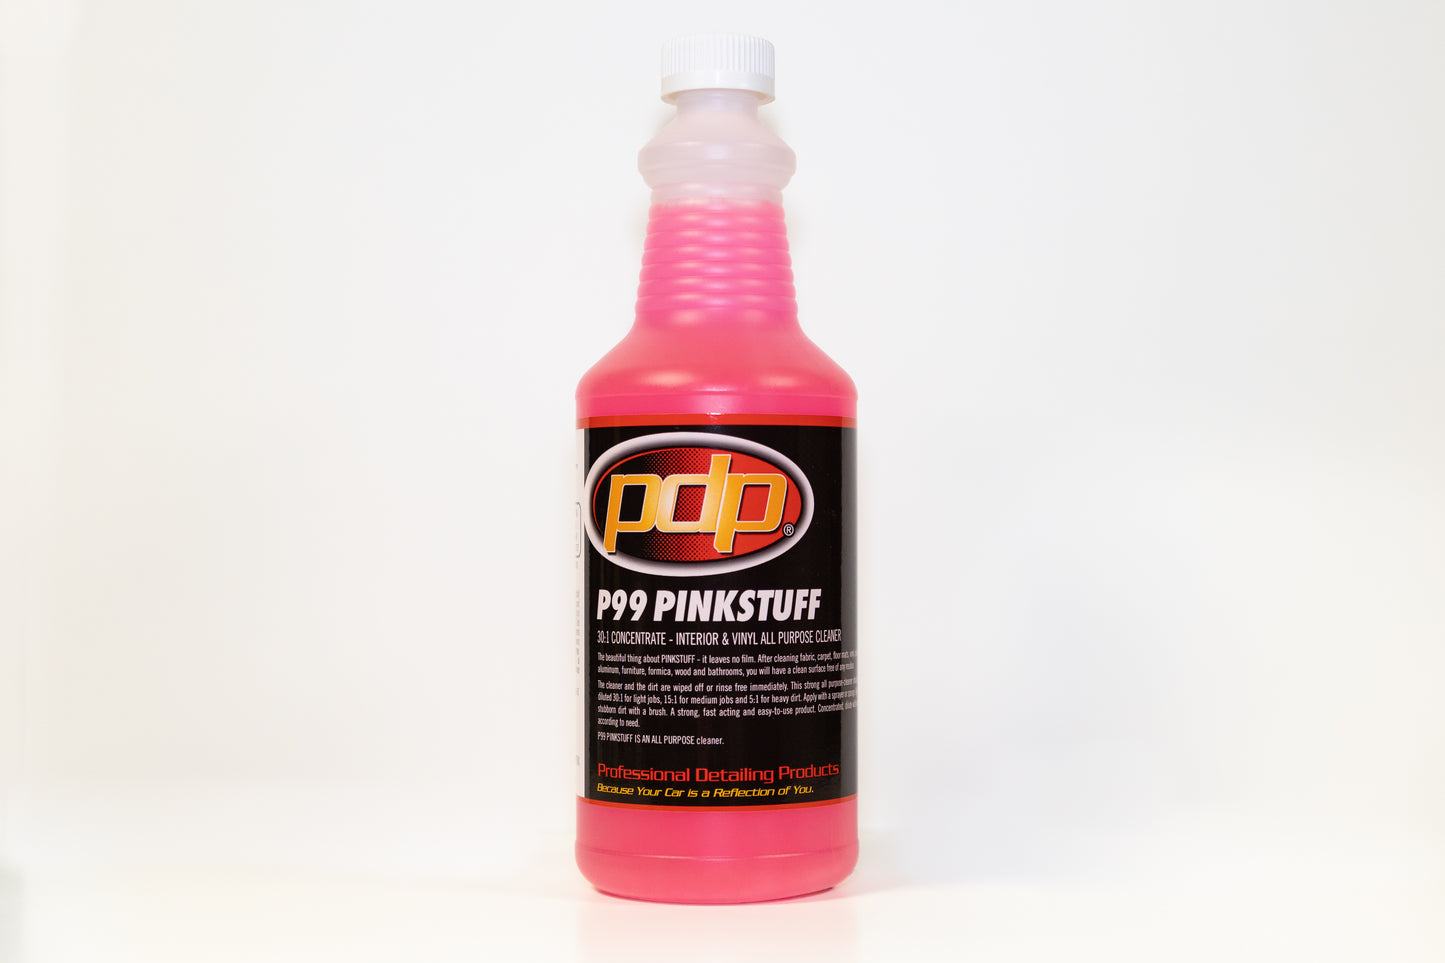 PINKSTUFF . Professional Detailing Products, Because Your Car is a  Reflection of You